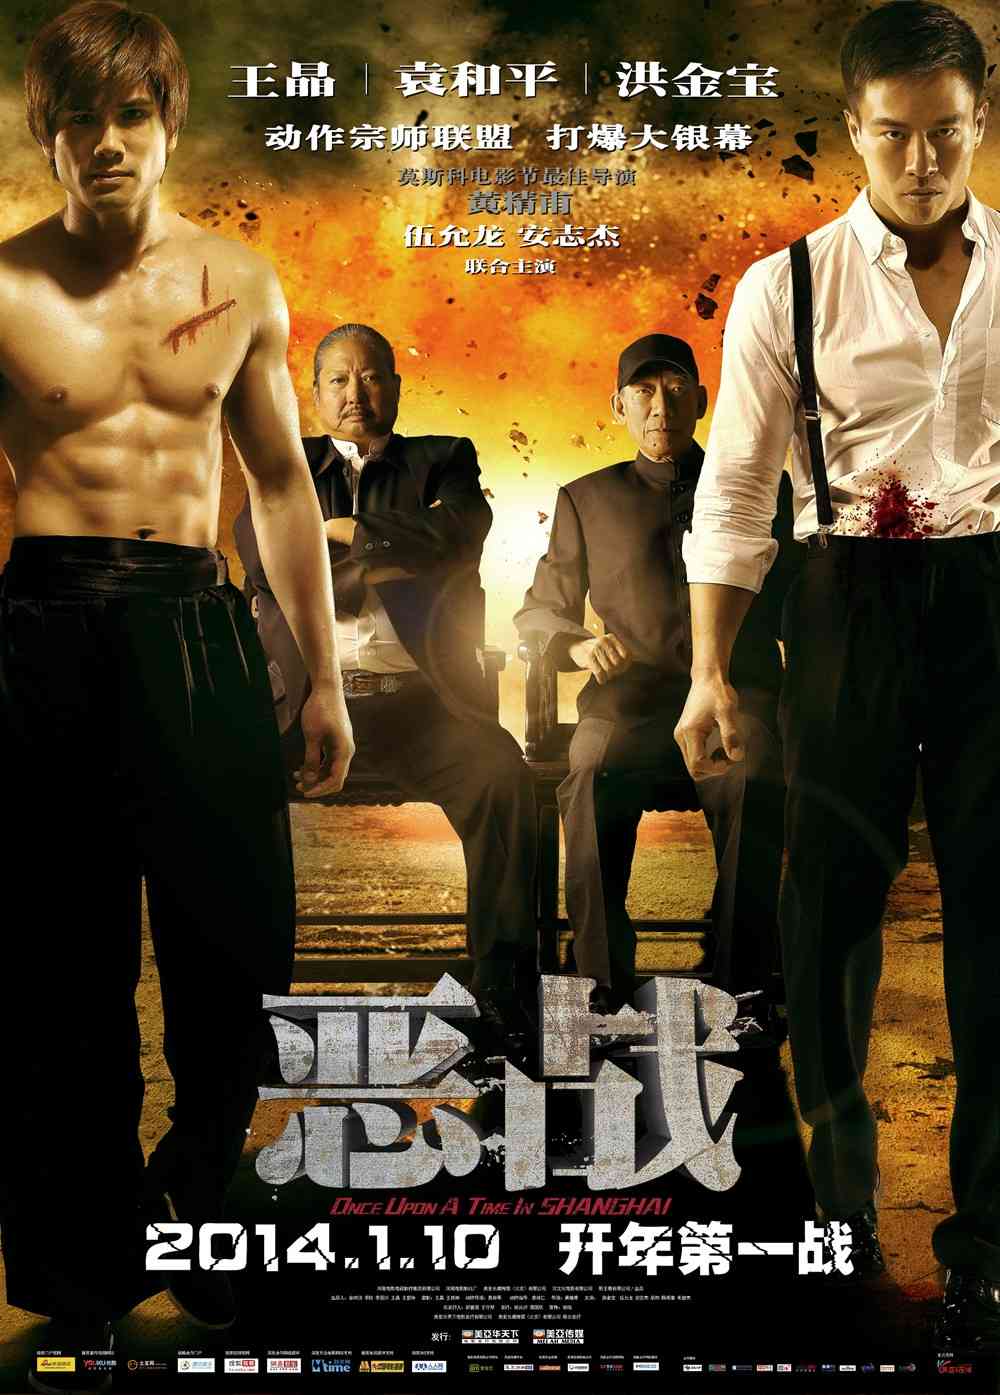 FULL MOVIE: Once Upon A Time In Shanghai (2014) [Action]